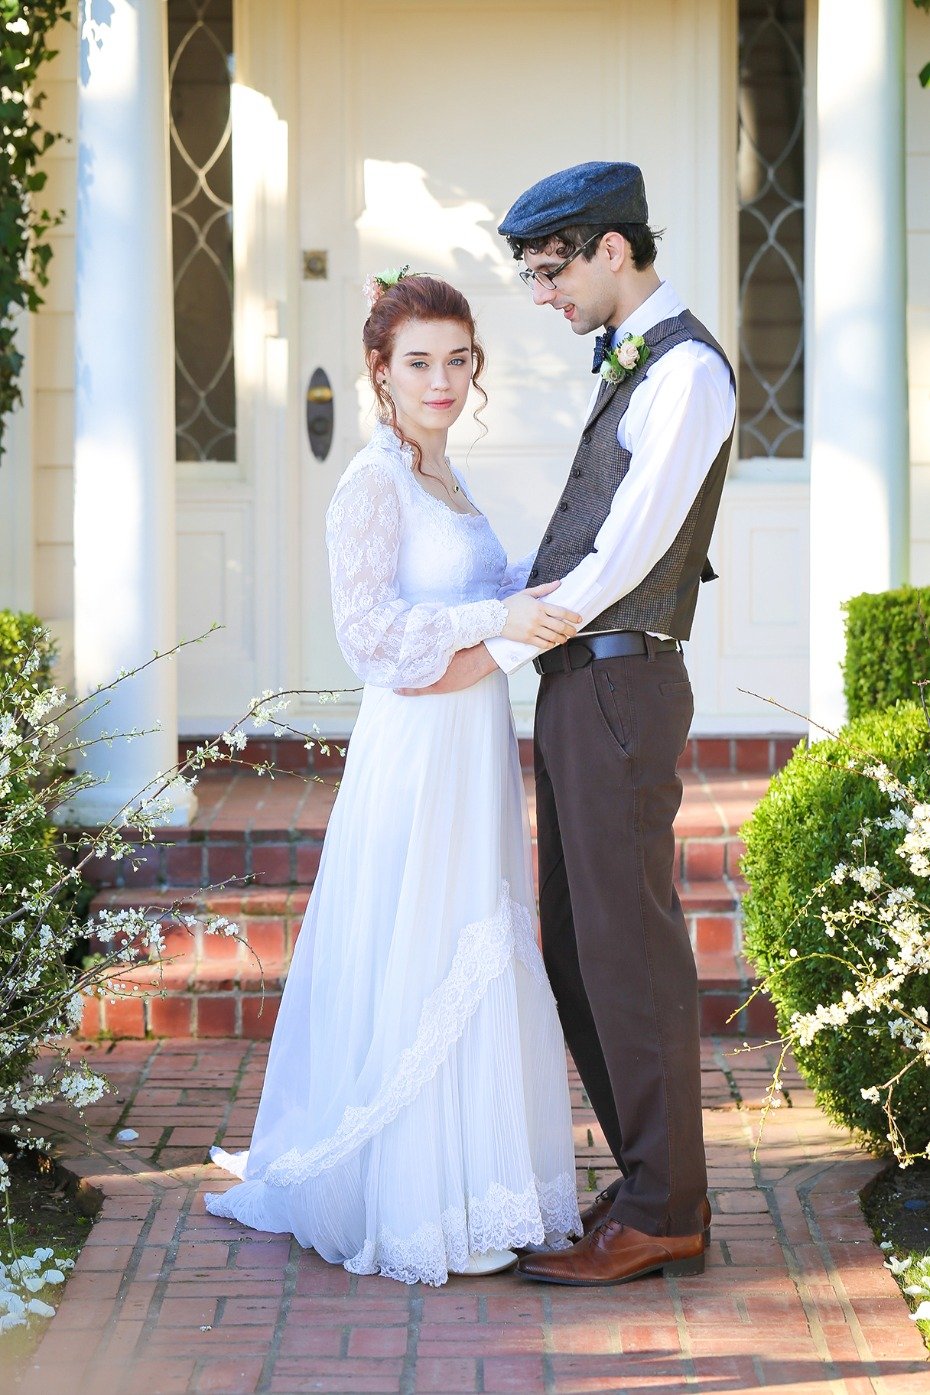 Vintage wedding ideas inspired by Anne of Green Gables